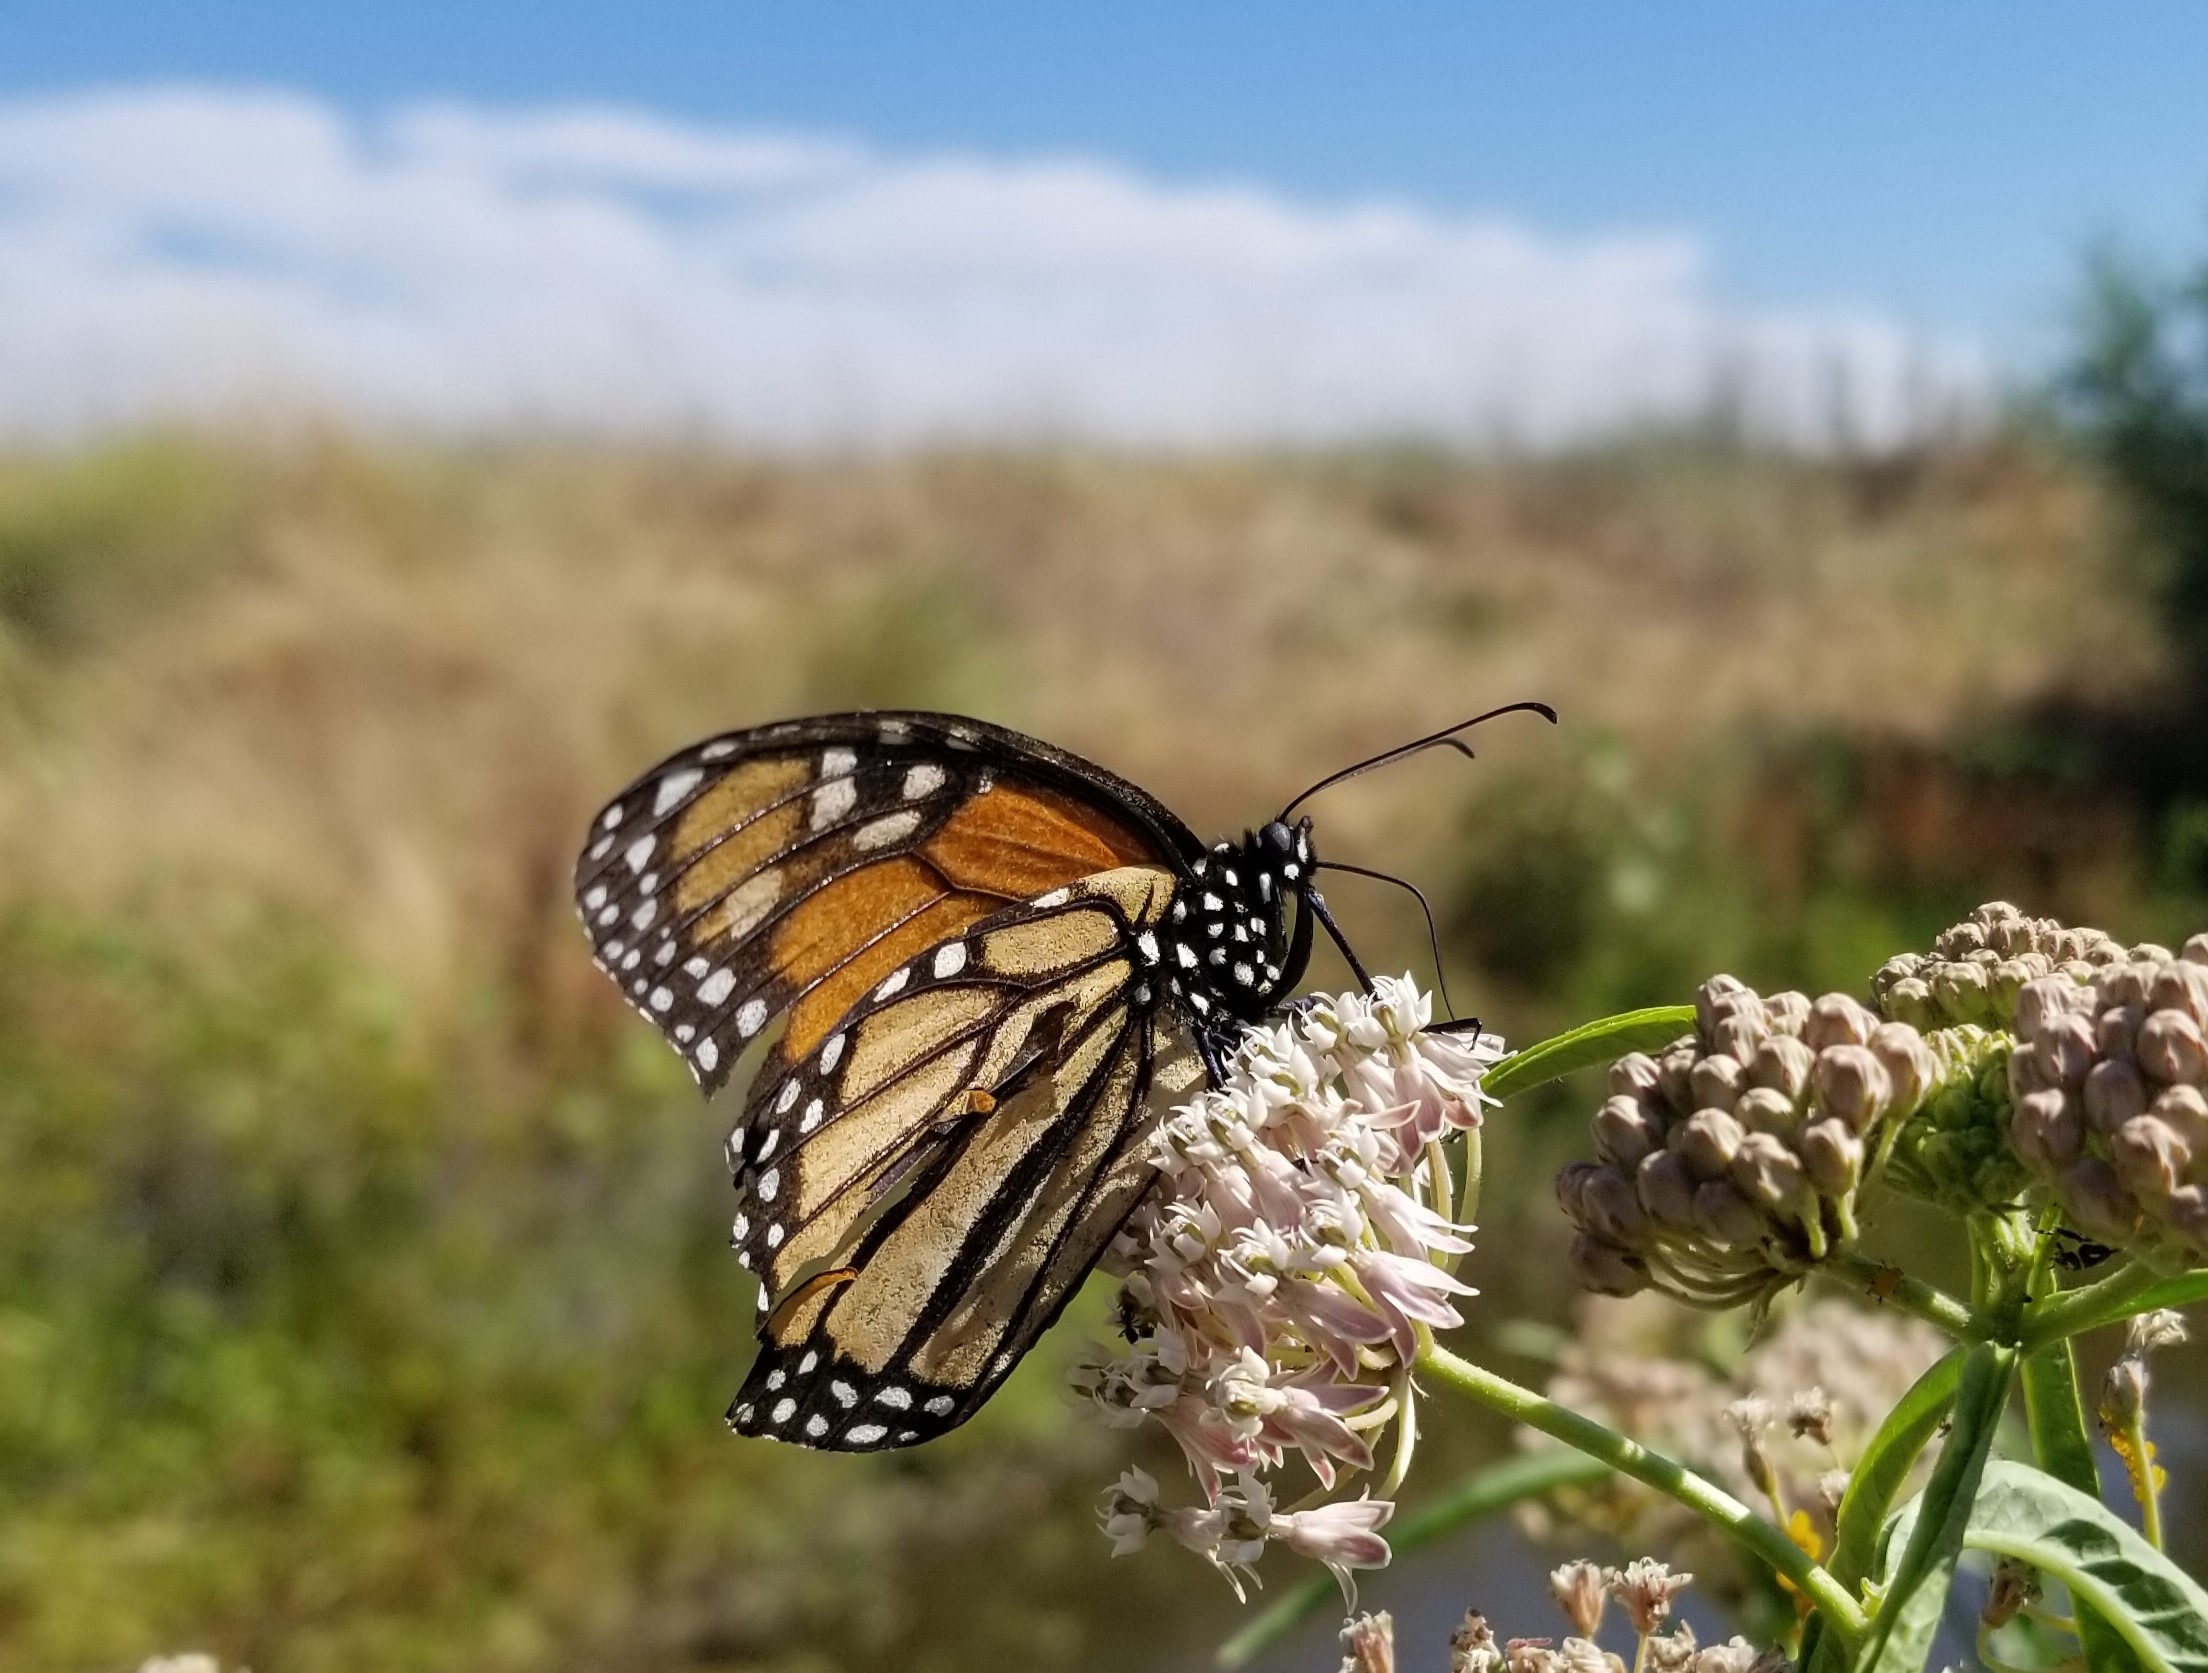 An orange and black monarch butterfly with tattered wings rests on a pink milkweed bloom